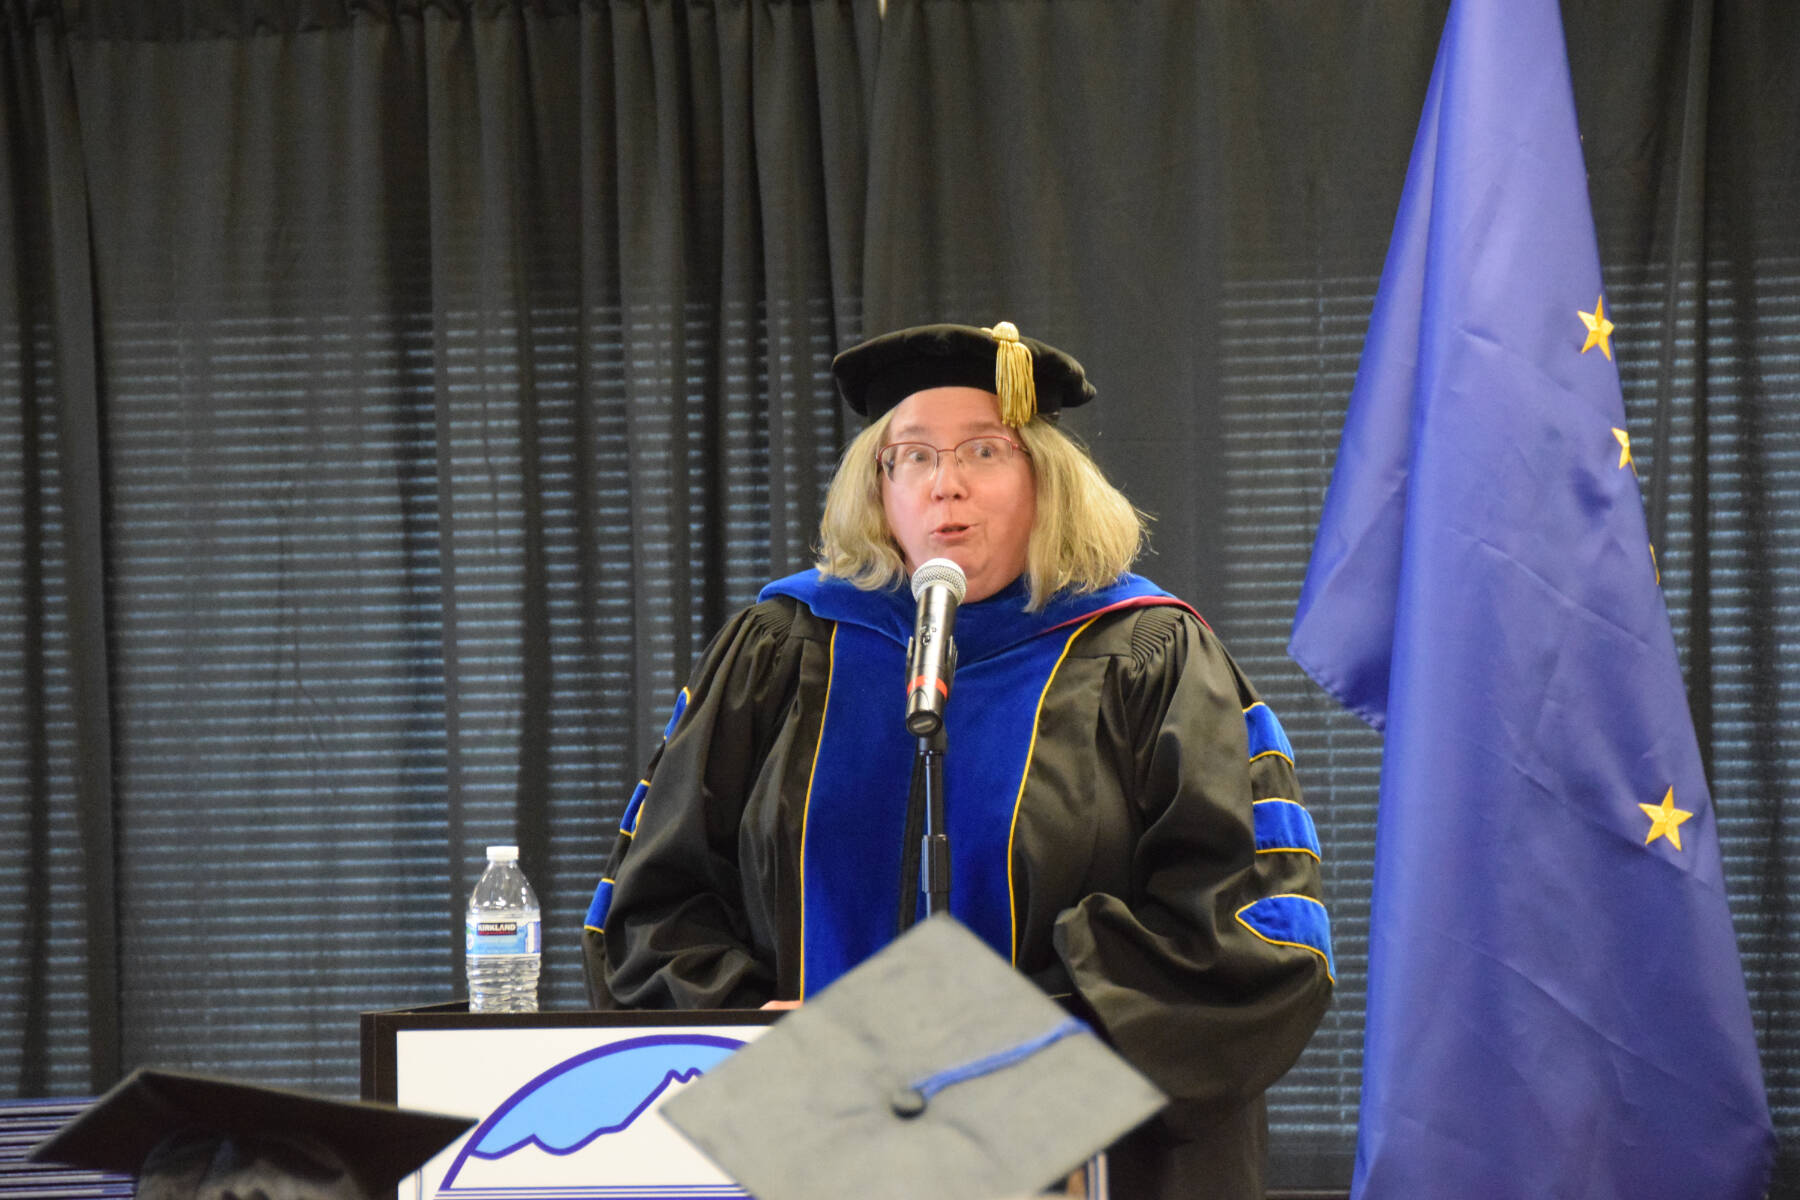 Keynote speaker Dr. Paula Martin addresses the graduates at the 2023 Kachemak Bay Campus commencement on Wednesday, May 10, 2023, in Homer, Alaska. (Photo by Delcenia Cosman/Homer News)